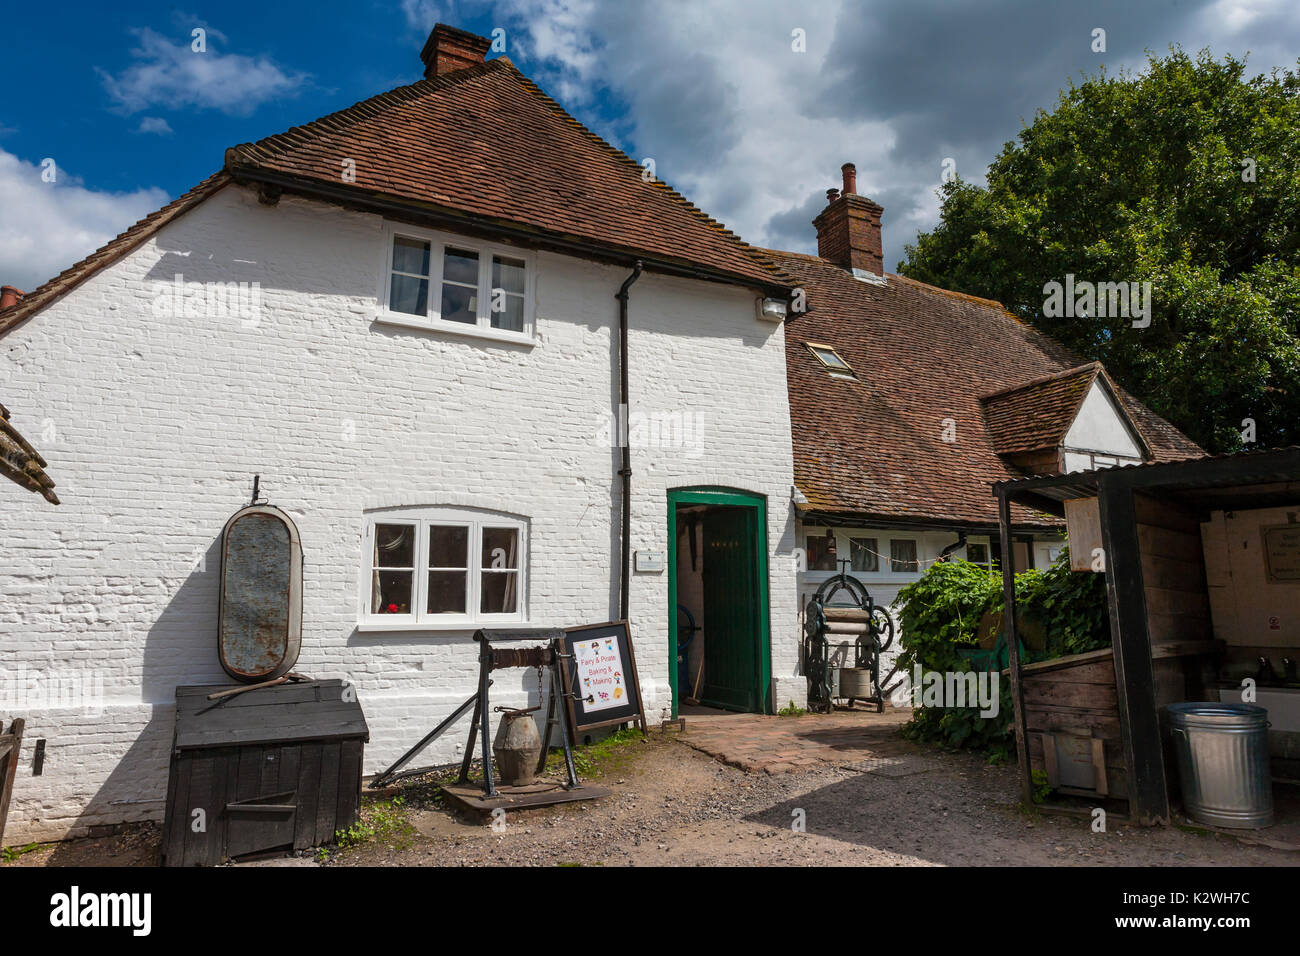 Manor Farm, Bursledon, Hampshire, England, which featured in the recent BBC2 series 'Wartime Farm' Stock Photo